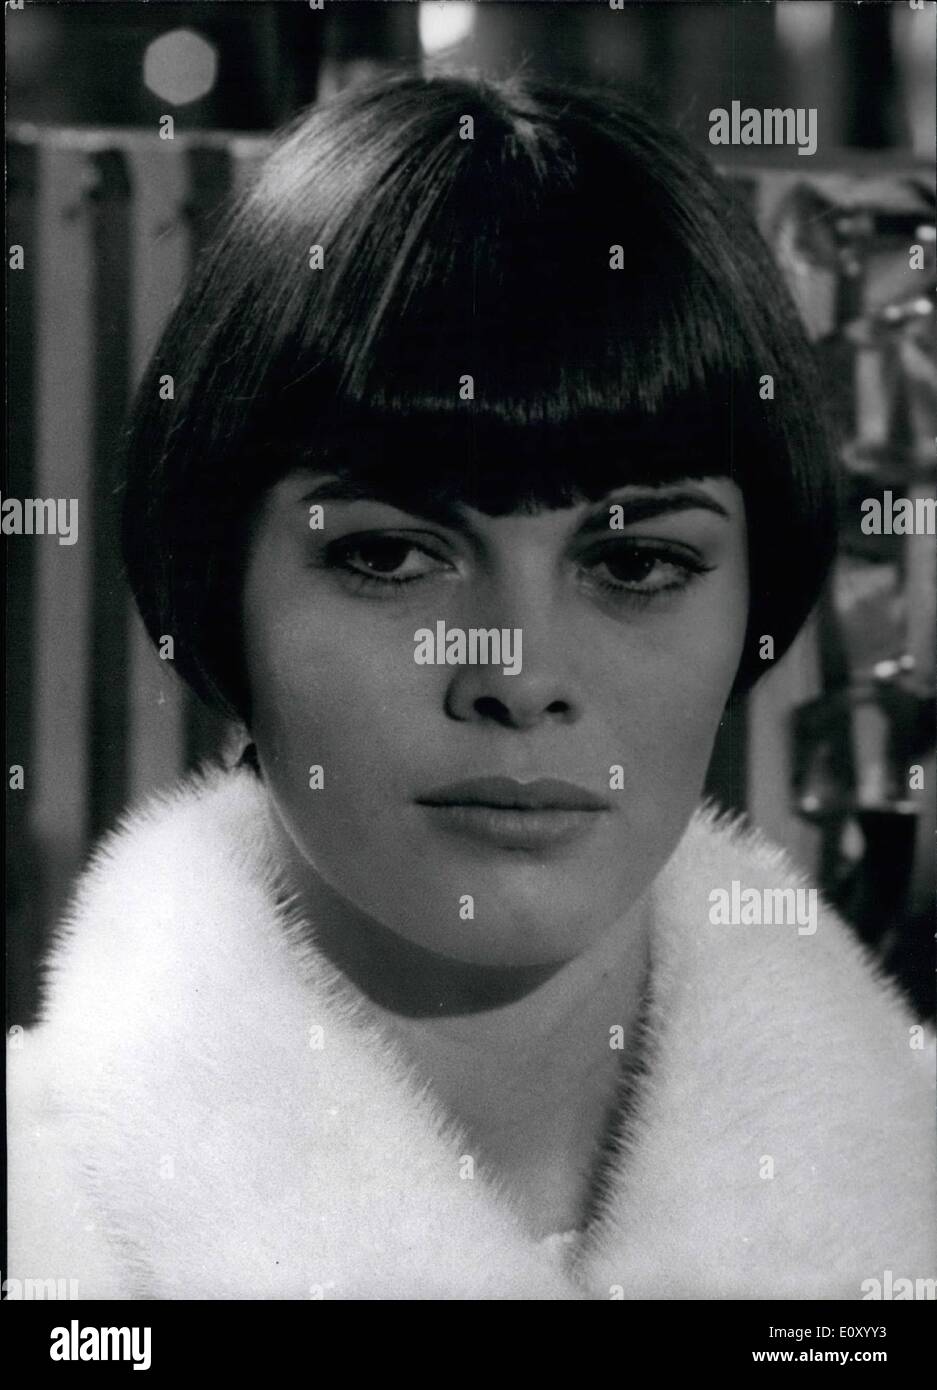 Feb. 02, 1968 - MIREILLE MATHIEU BADLY INJURED IN CAR CRASH - MIREILLE MATHIEU, THE FAMOUS FRENCH SINGER, WAS SERIOUSLY INJURED Stock Photo